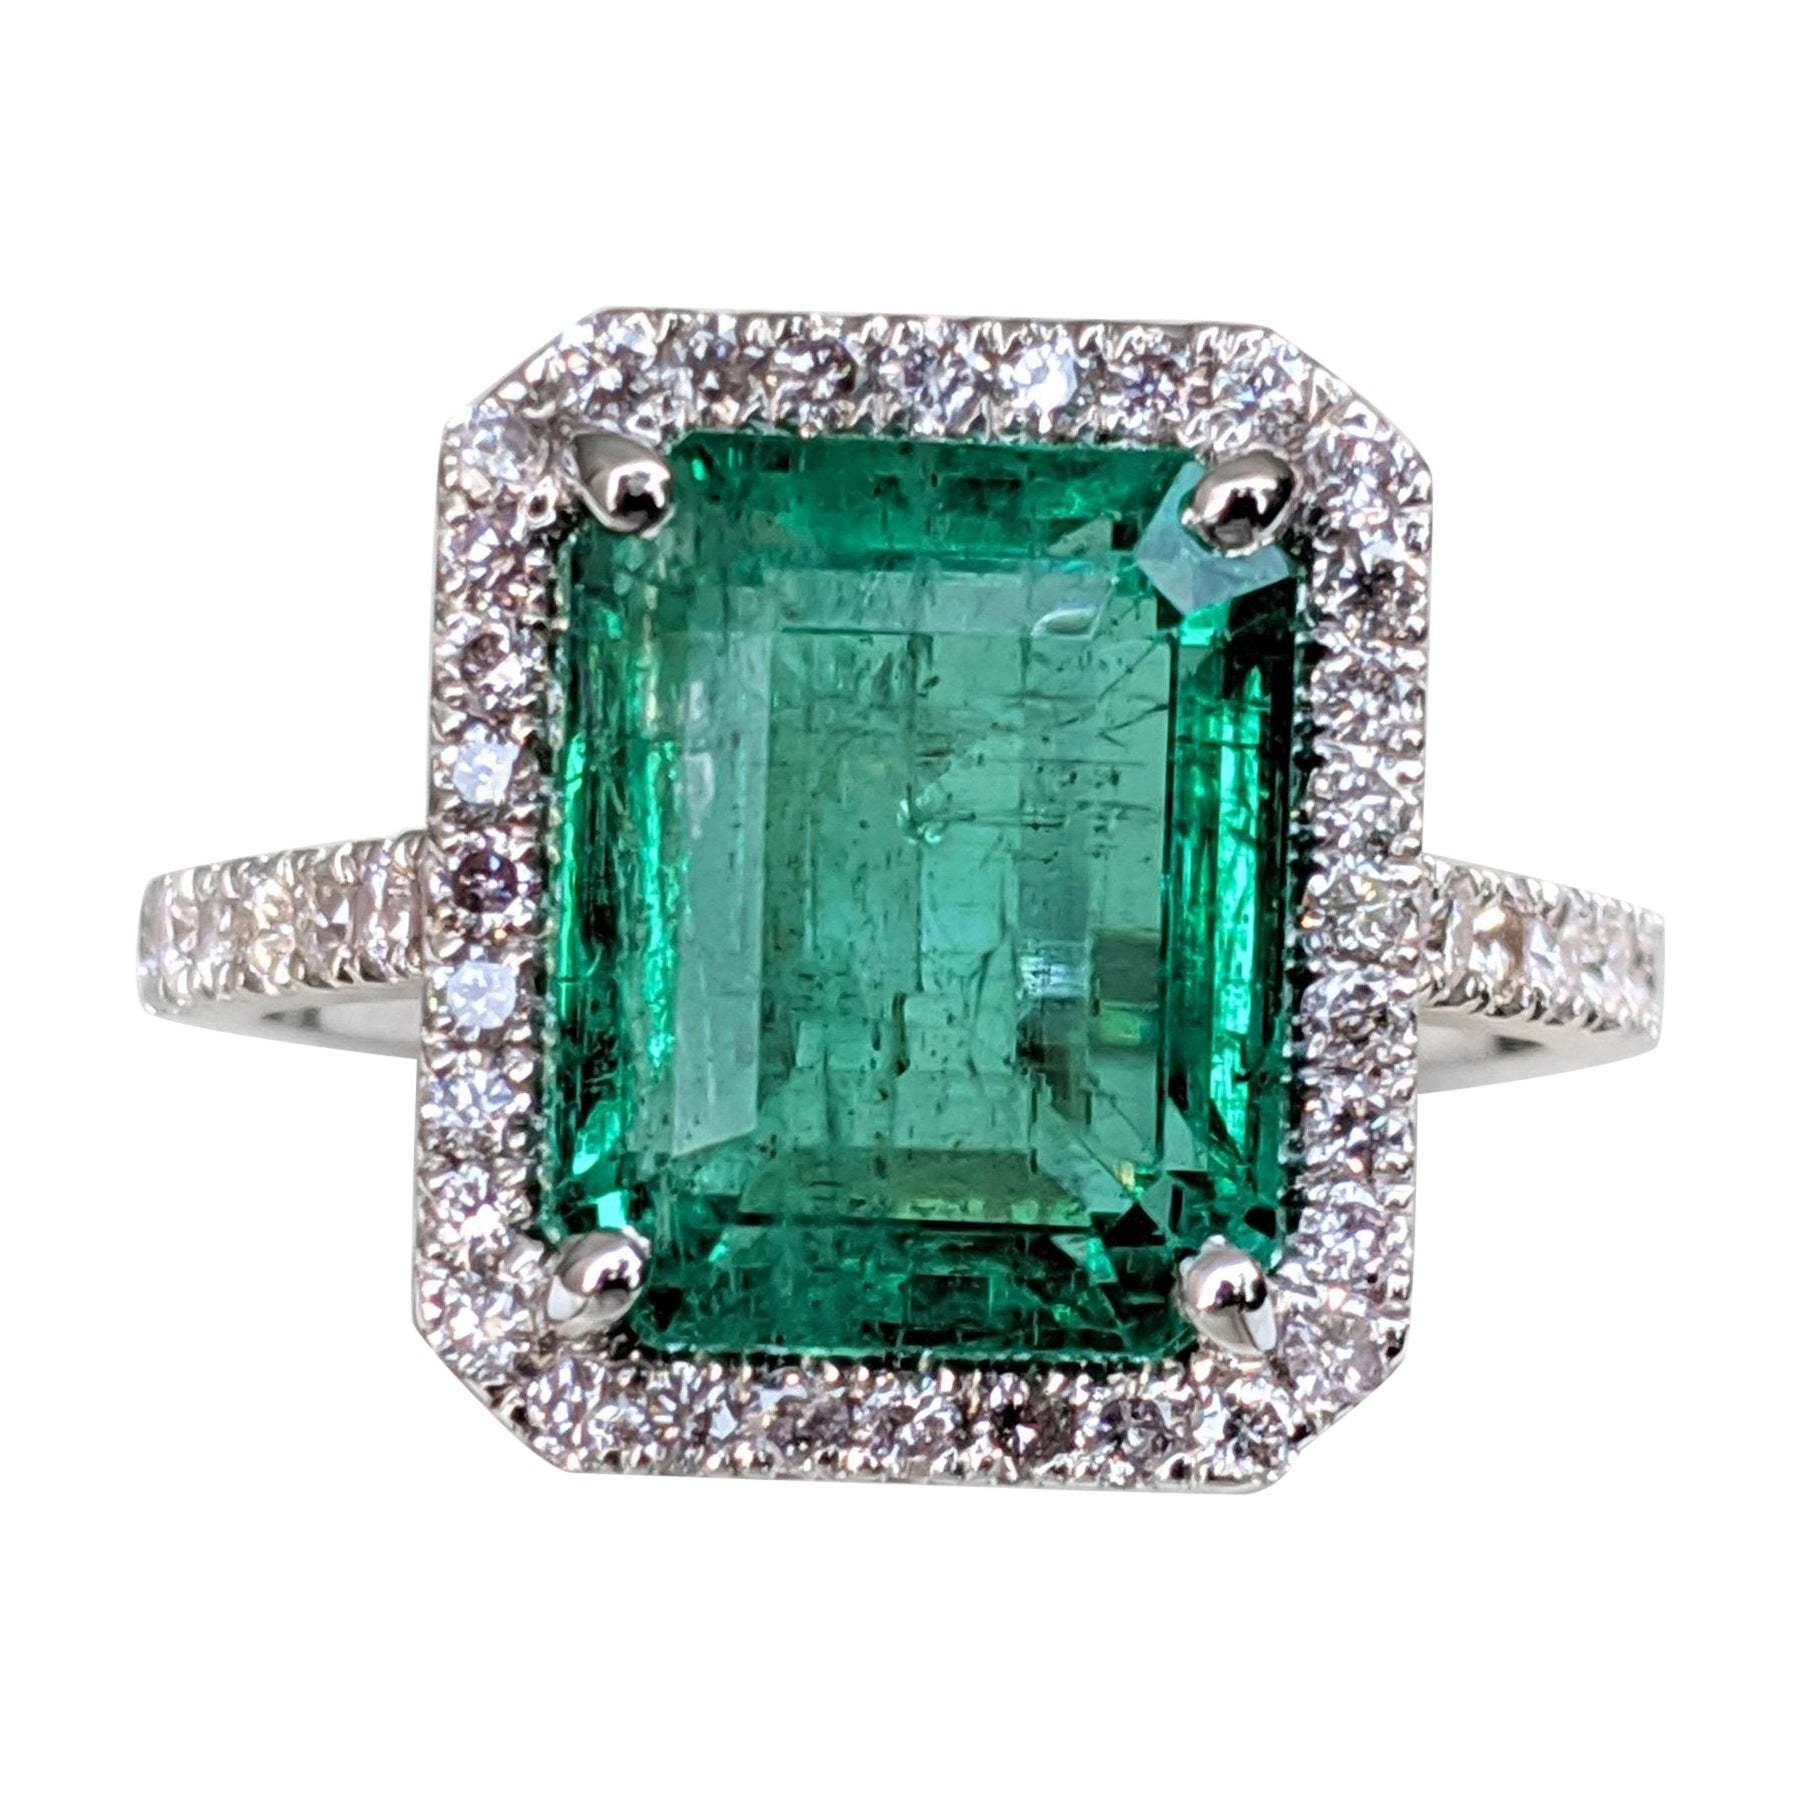 NO RESERVE!  6.48 Carat Emerald & 0.62Ct Pink Diamonds - 18K White Gold Ring For Sale